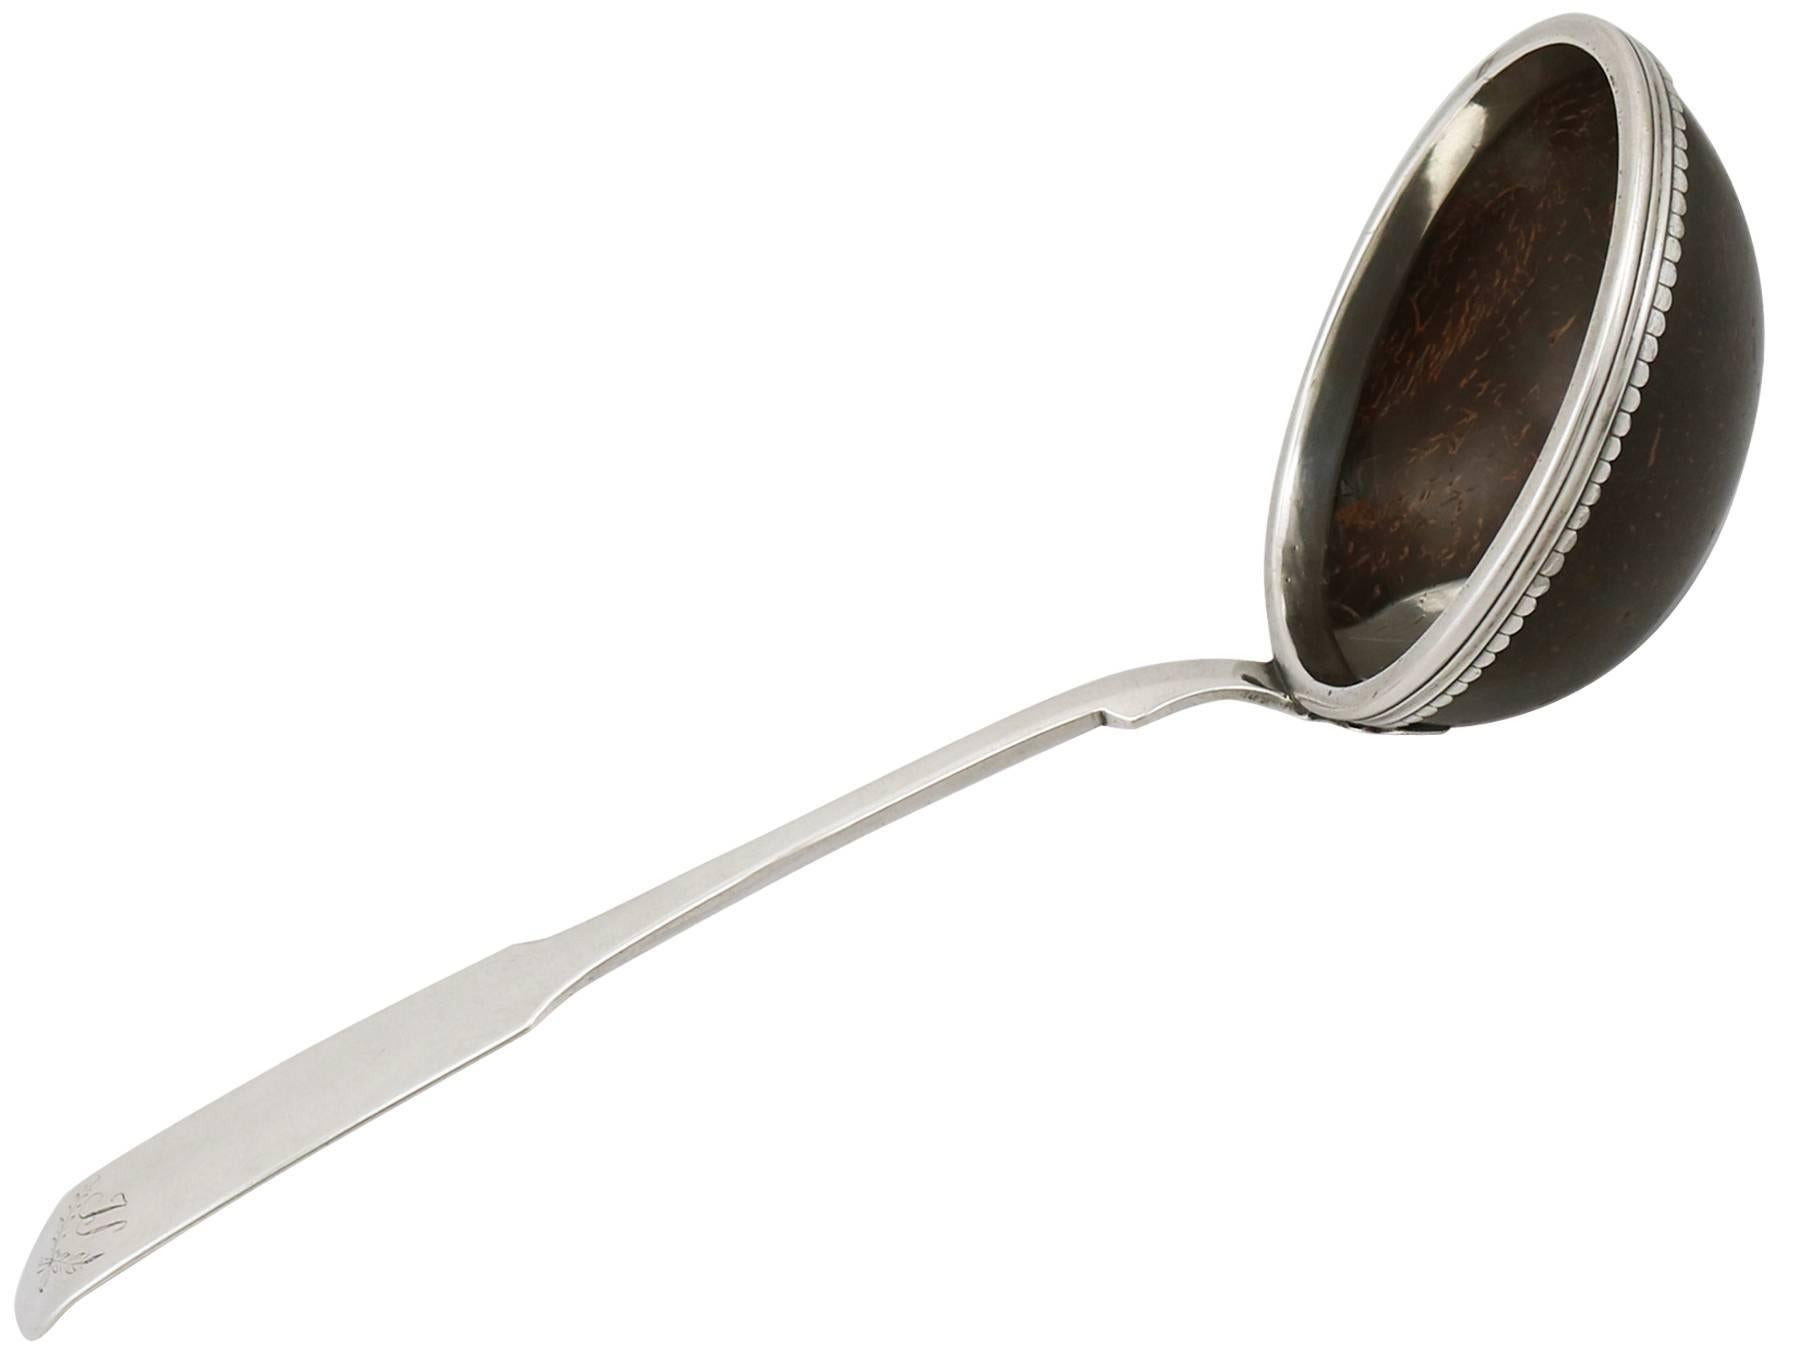 An exceptional, fine and impressive antique Russian silver mounted coconut ladle; an addition to our Russian silverware collection.

This exceptional antique Russian silver mounted coconut ladle has been crafted in the Fiddle pattern.

The anterior